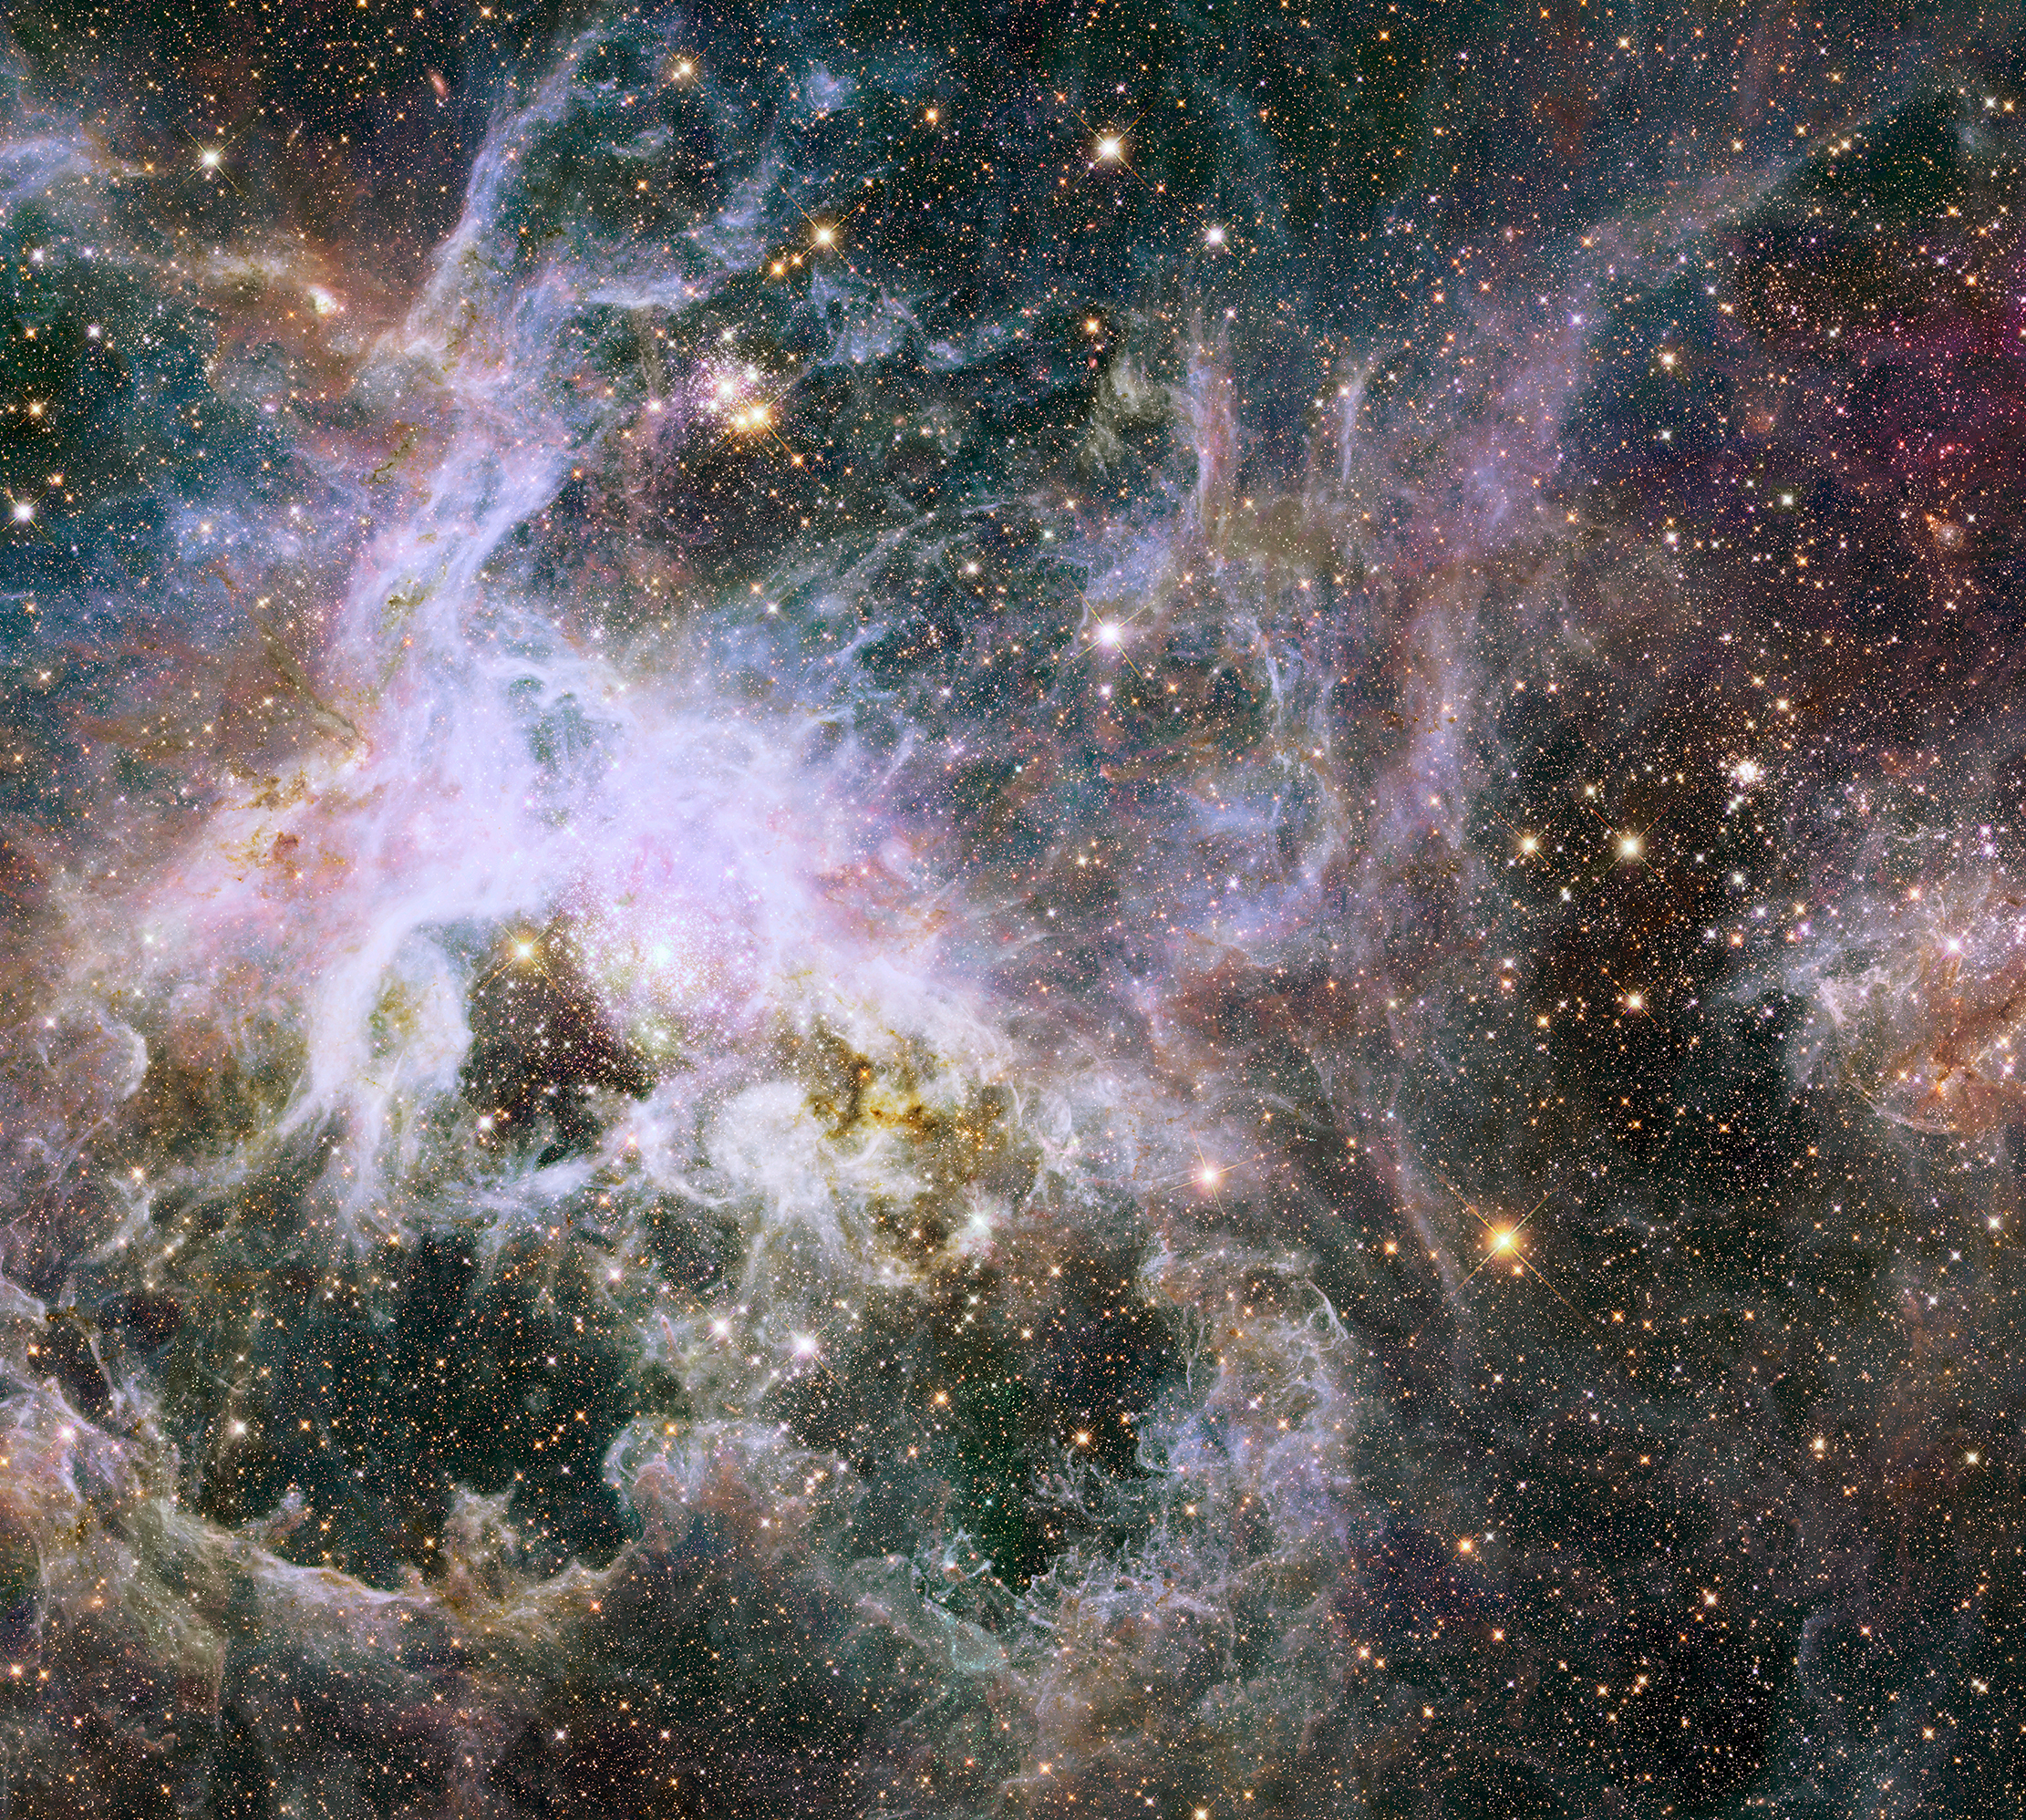 Intertwined wisps of light purple clouds of dust and gas envelope the entire image. Countless orange stars pepper the image.